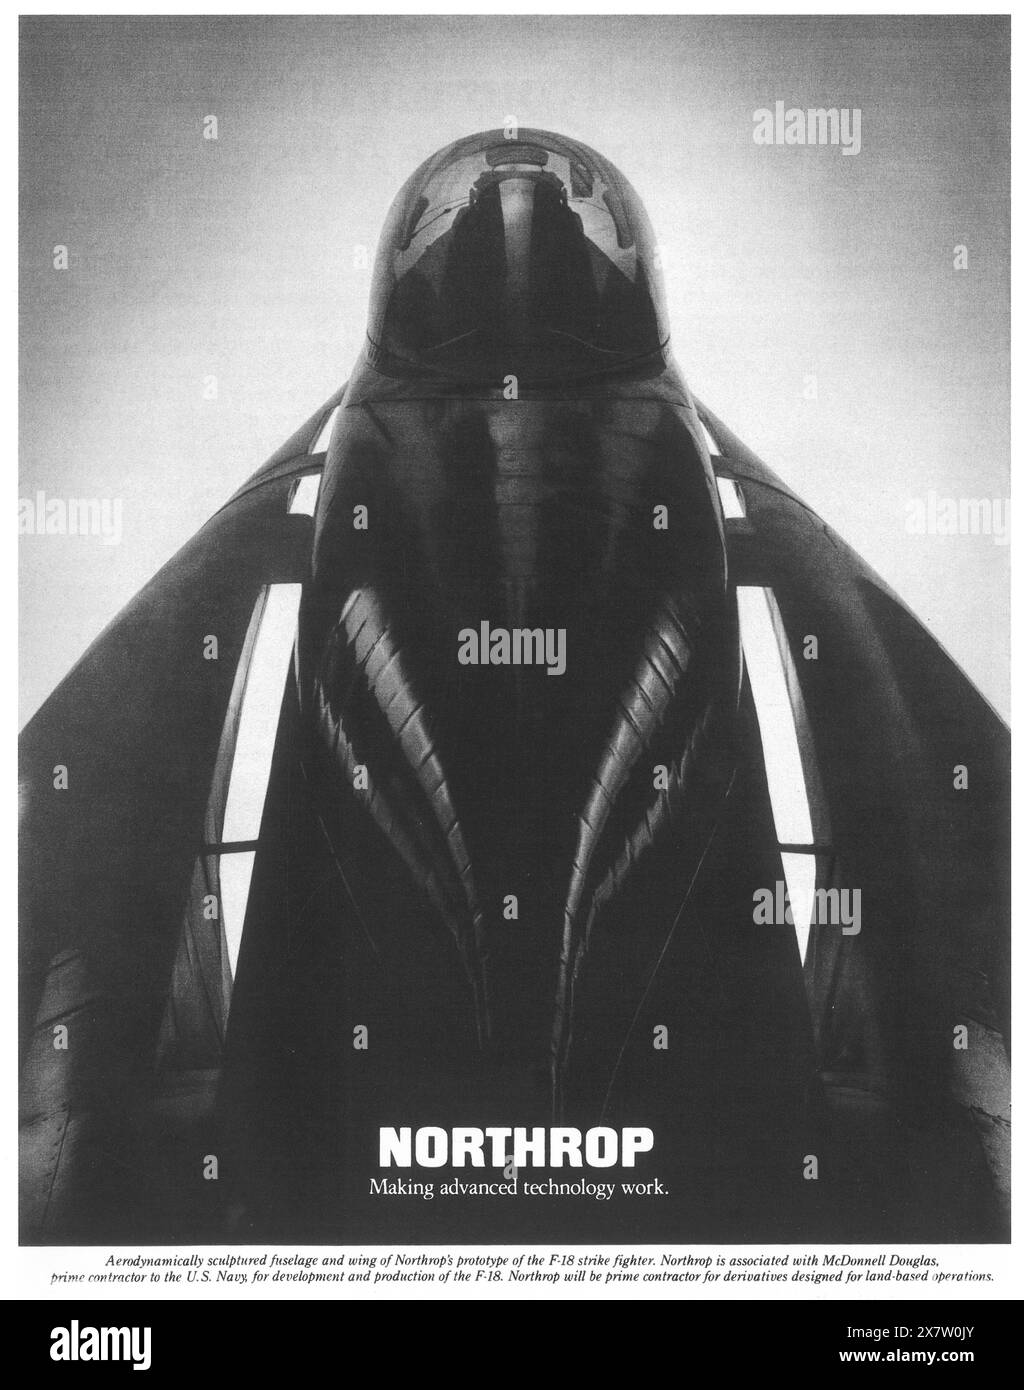 1978 Northrop ad - fuselage and wing of F-18 strike fighter plane Stock Photo